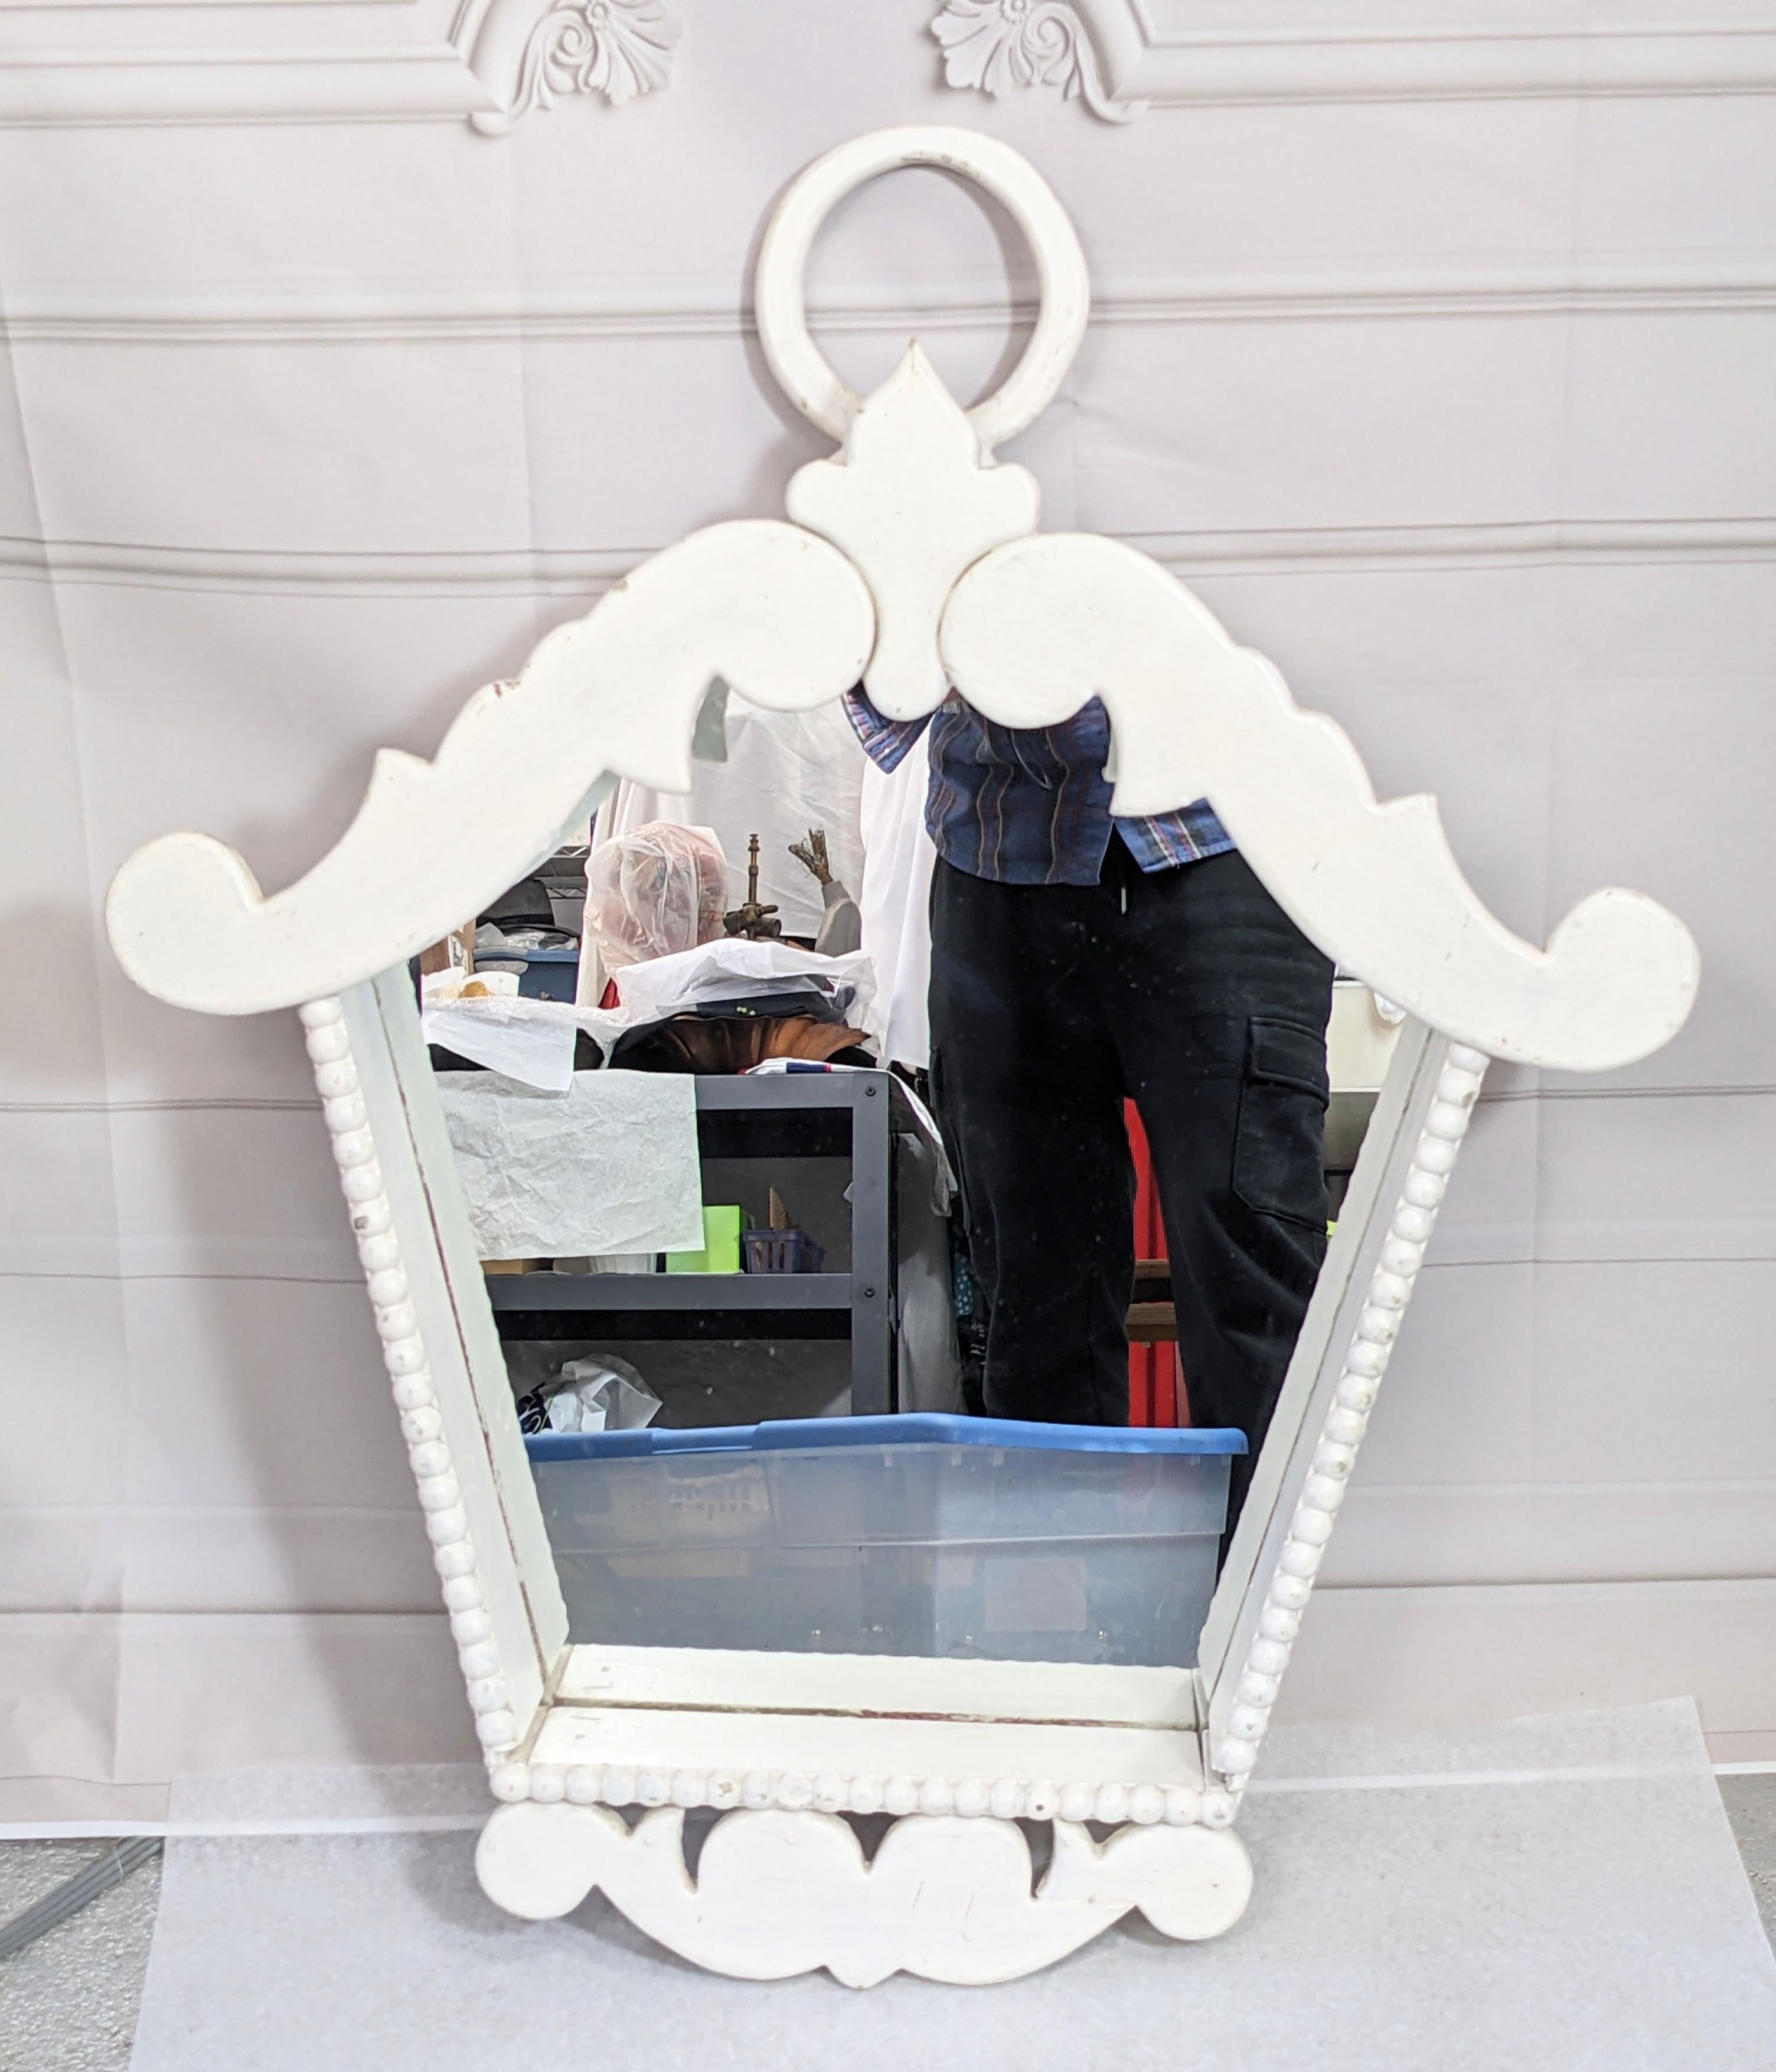 Charming Mirrored Art Deco Wall Display from the 1940's. Shaped like a bird house, handmade of wood painted bright white with slightly Folksy/ French 40's/Surrealist/Dorothy Draper vibes. Can be used to spotlight a vignette of objects or one larger